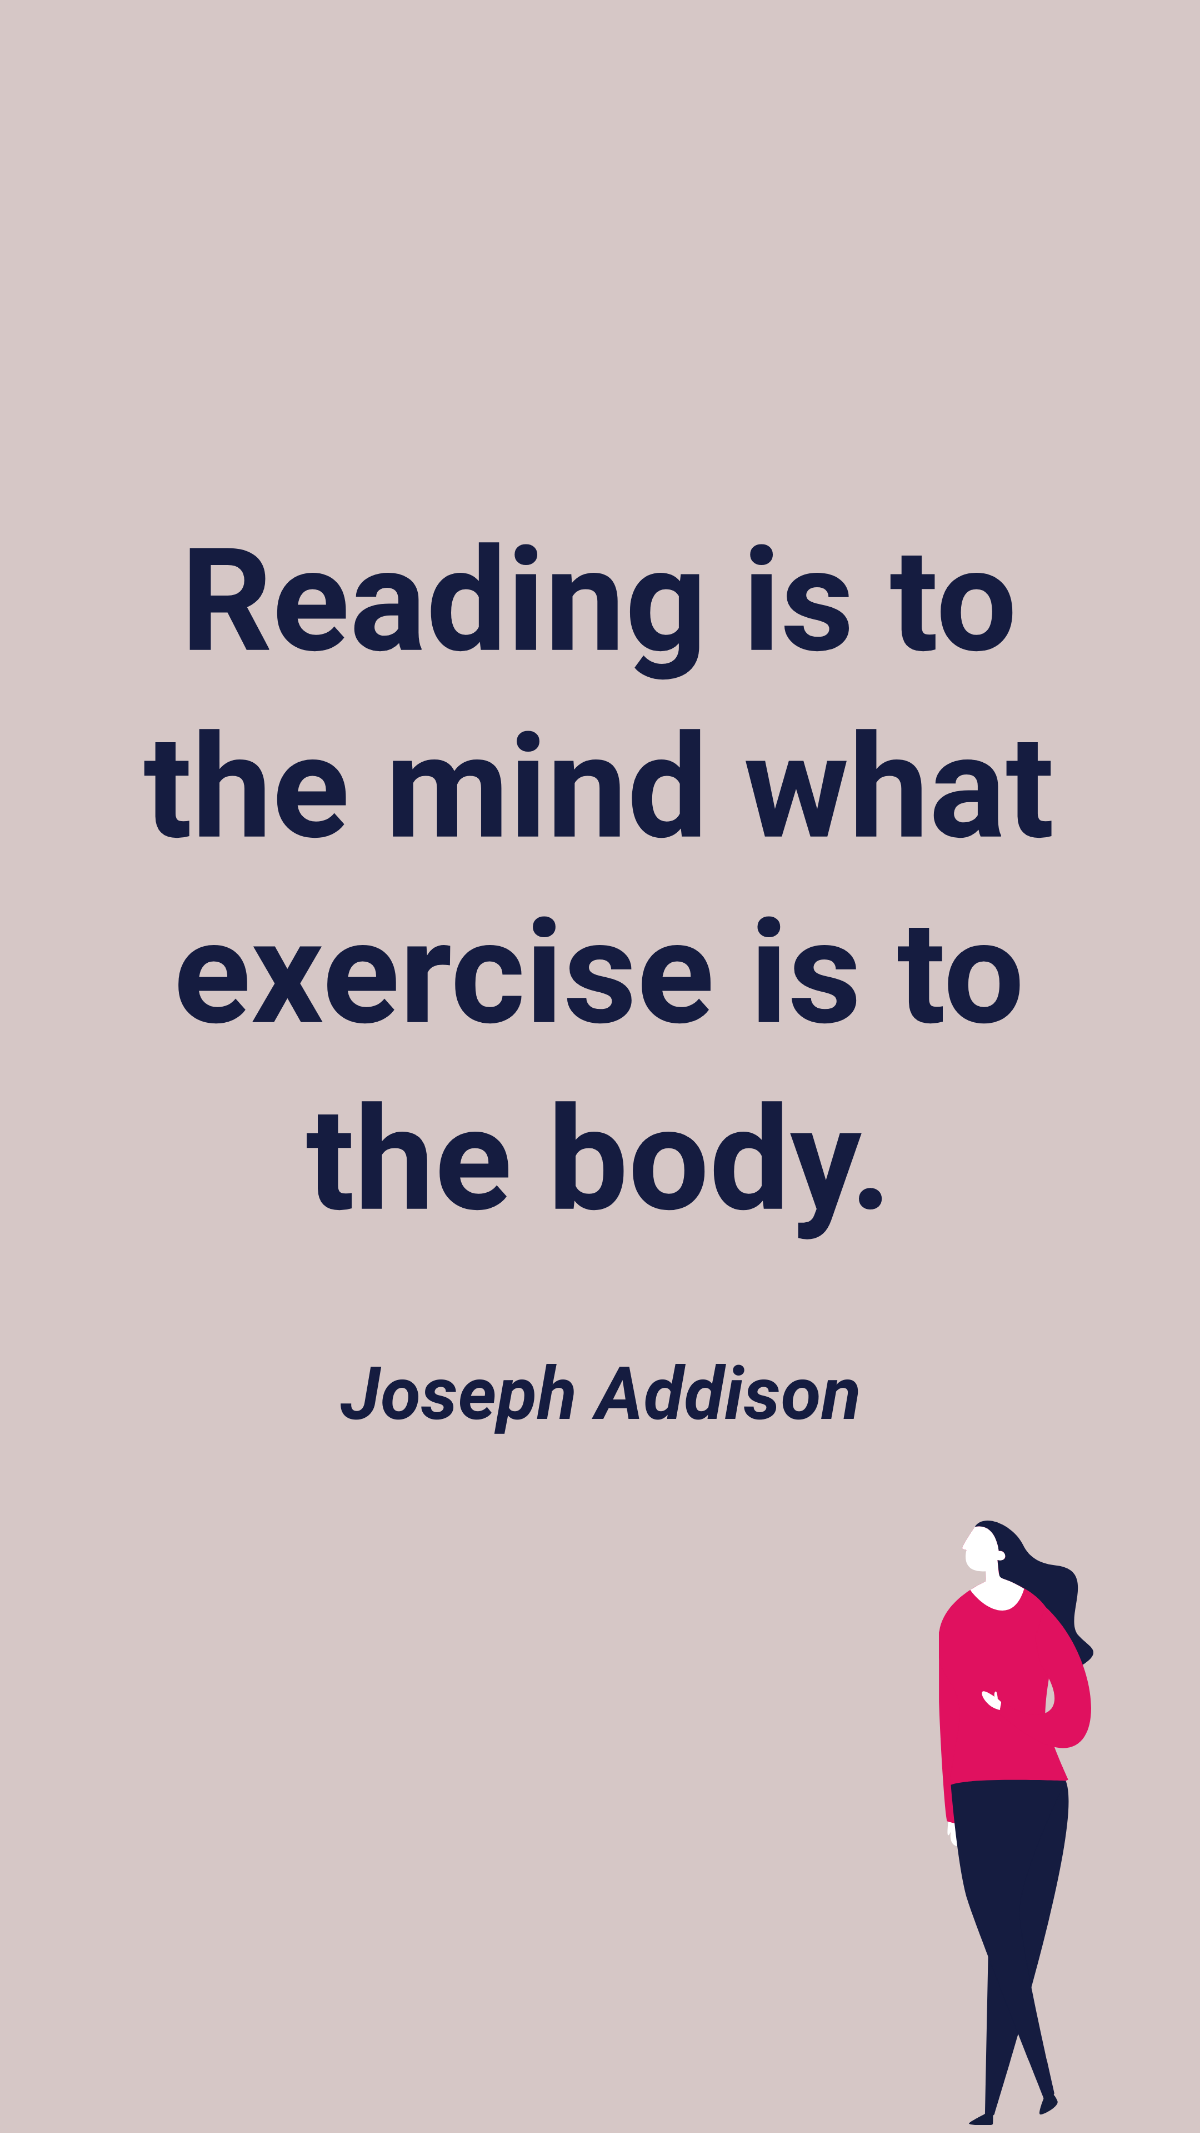 Joseph Addison - Reading is to the mind what exercise is to the body.